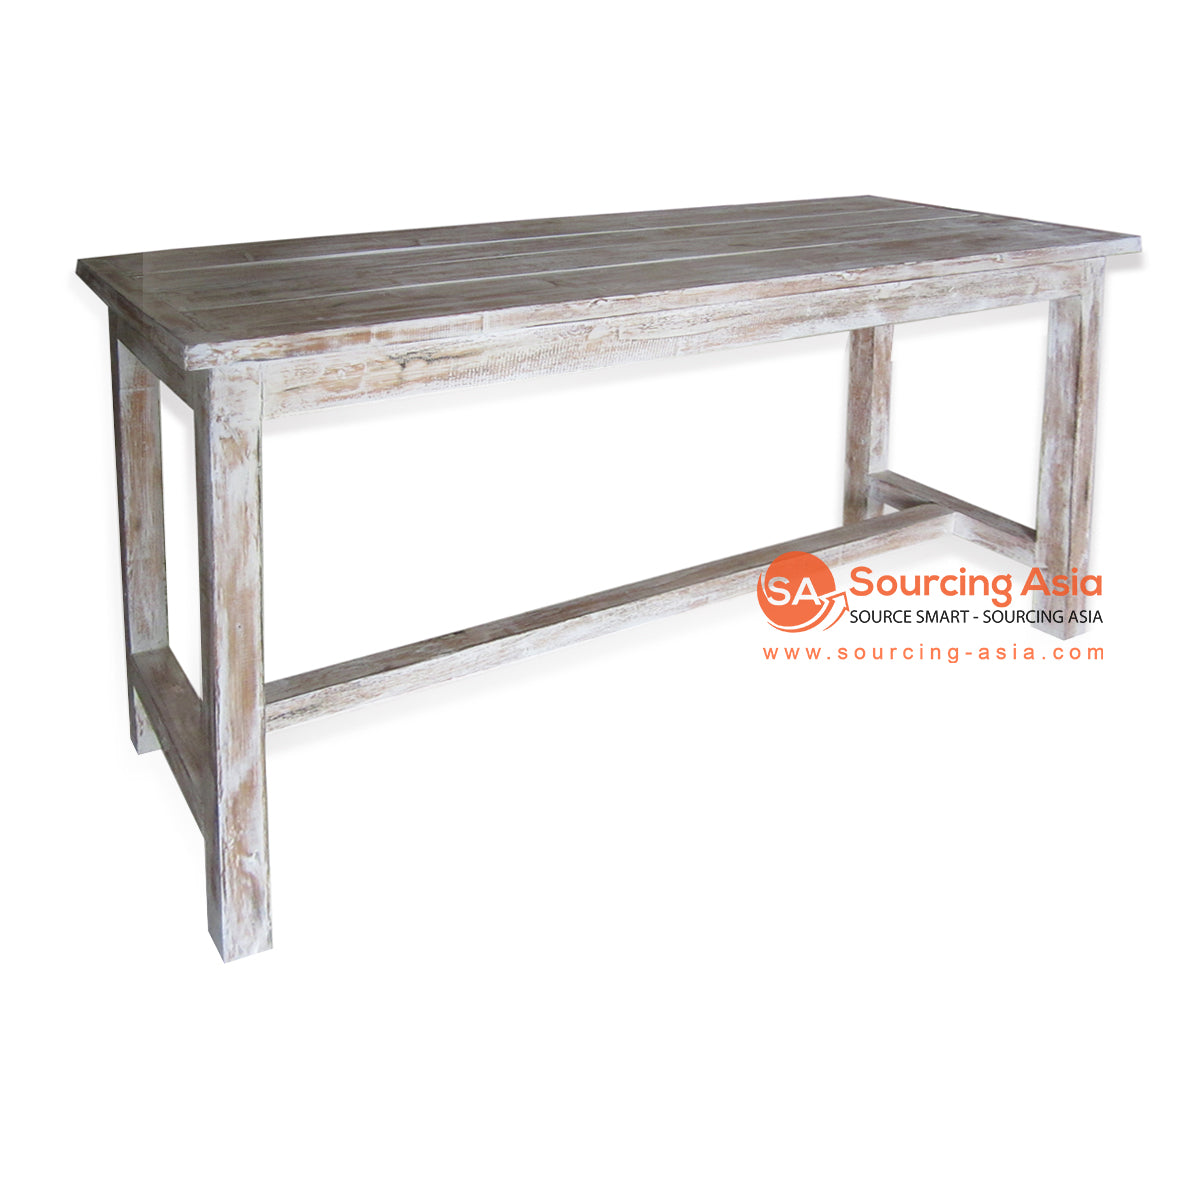 THE135BW BROWN WASH WOODEN CONSOLE TABLE